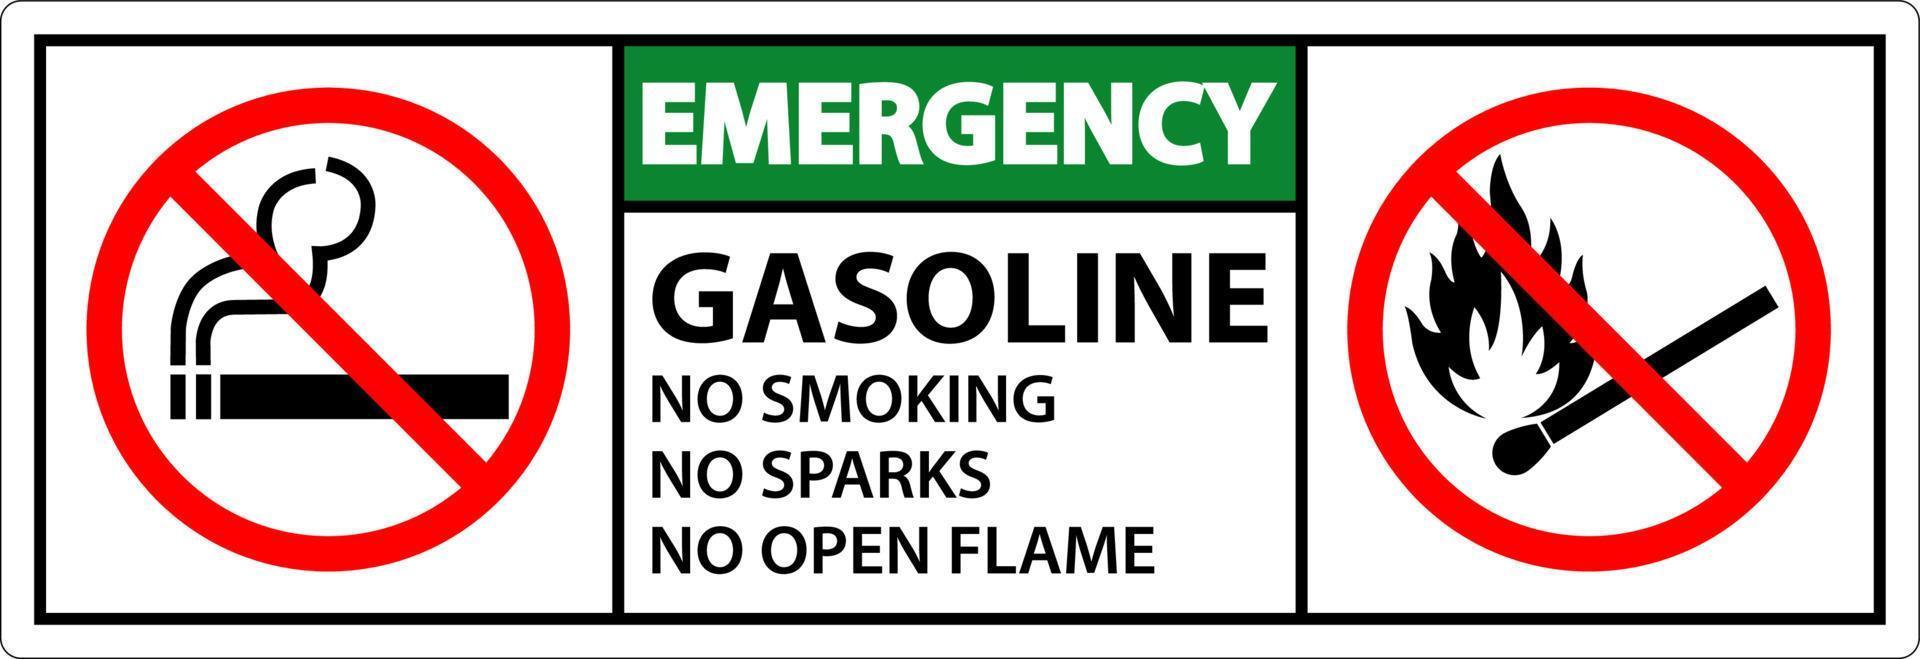 Emergency Gasoline No Smoking Sparks Or Open Flames Sign vector